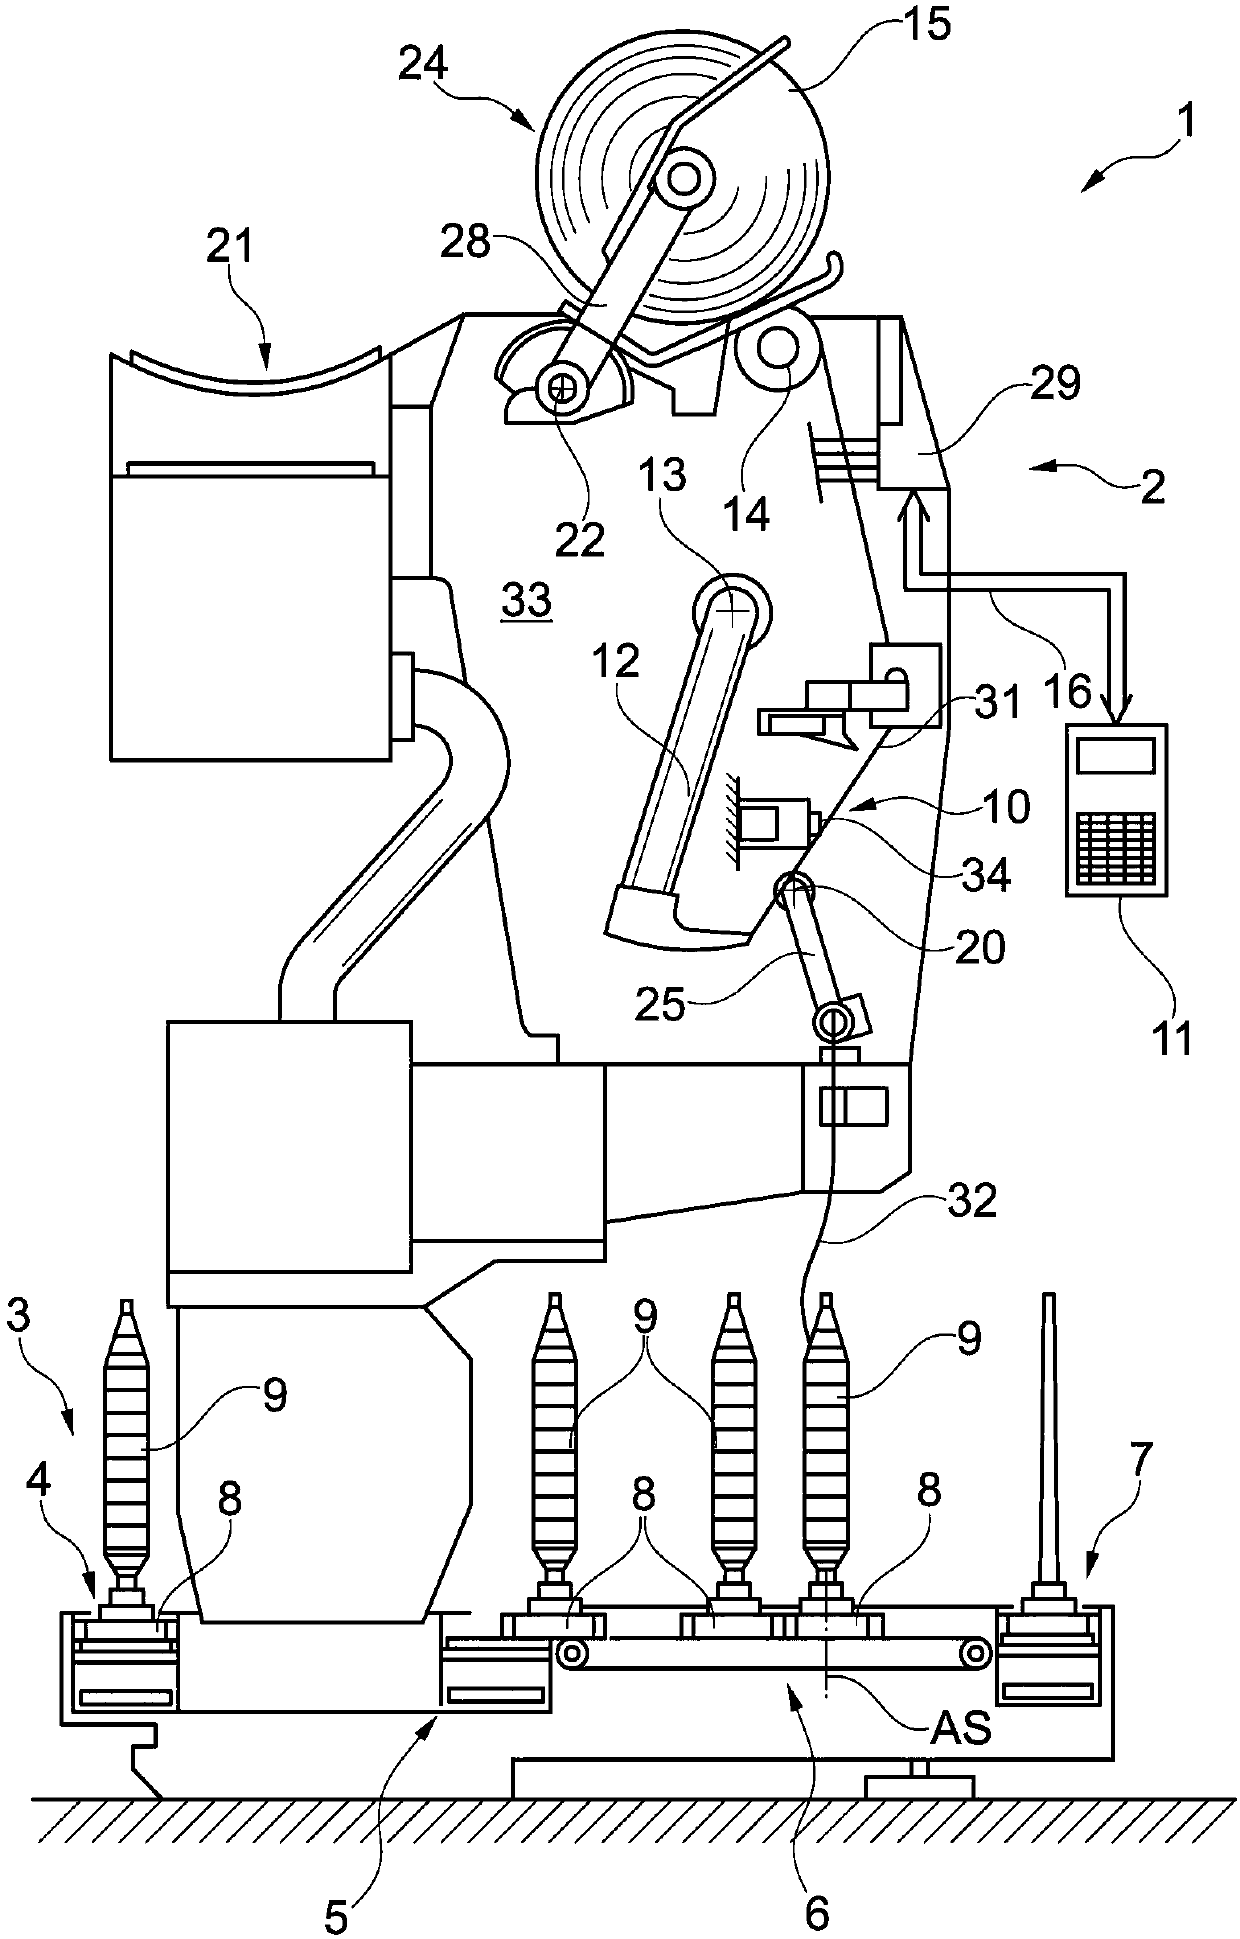 Yarn splicing device for a workstation of a textile machine producing cross-wound bobbins